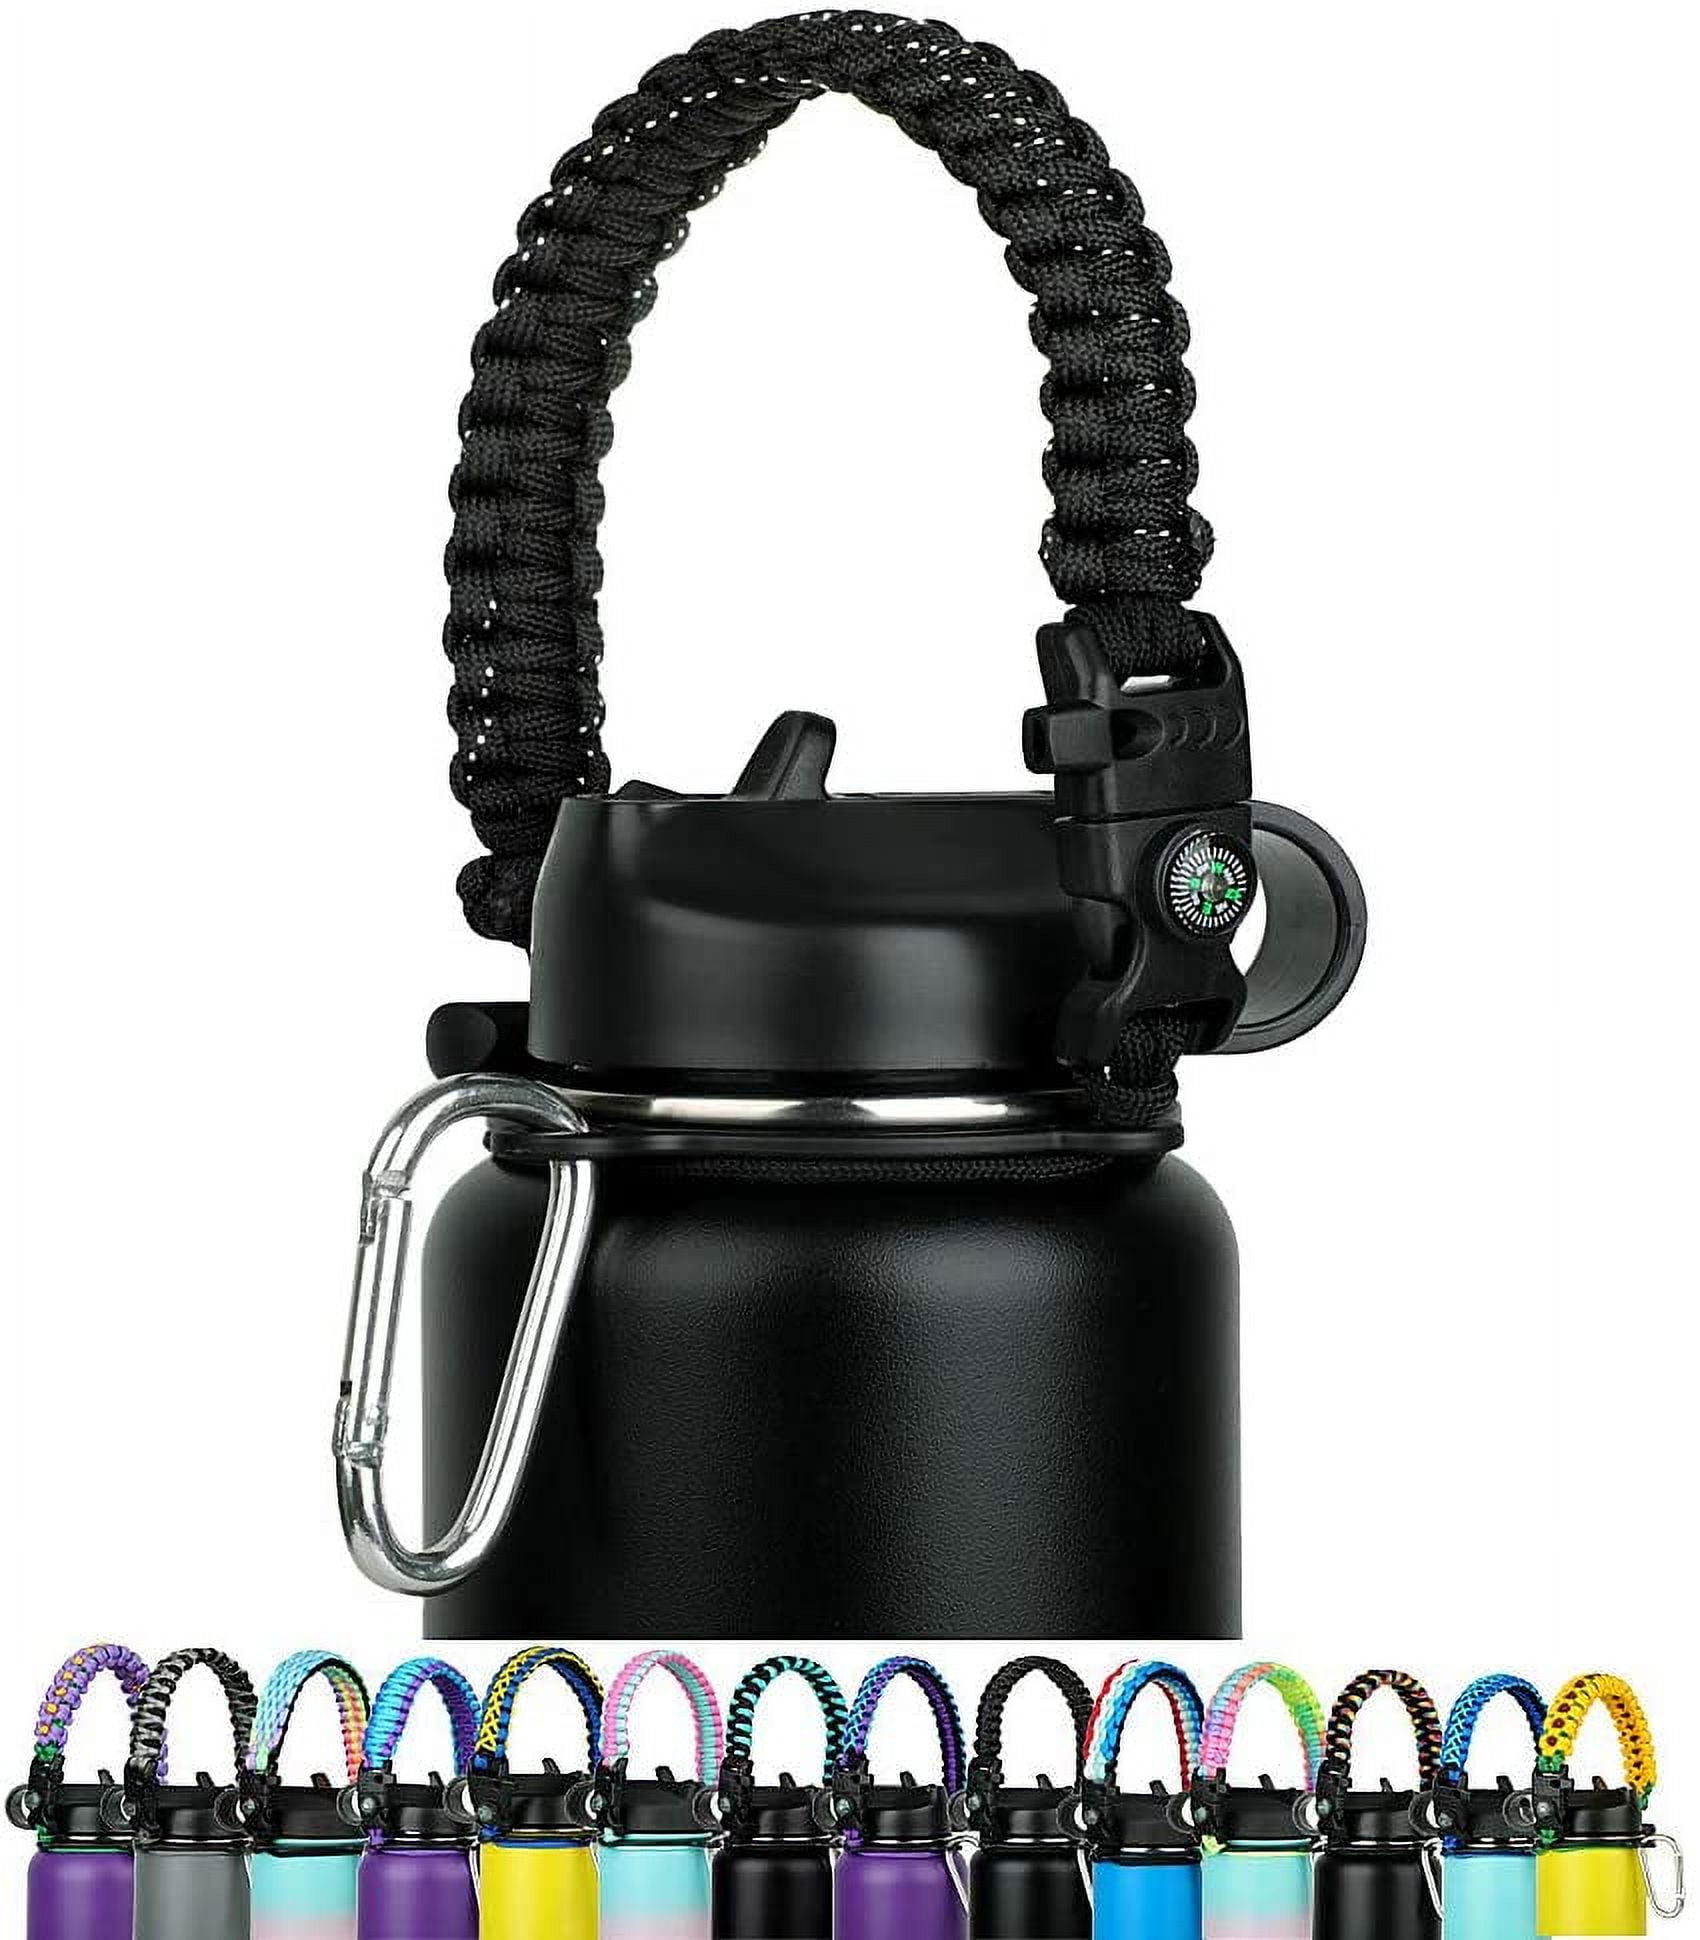 Shop for PAN Paracord Handle for Hydro Flask Wide Mouth Bottle, Paracord  Carrier Survival Strap with Safety Ring & Carabiner for Hydro Flask Nalgene  CamelBak Wide Mouth Water Bottles 12oz - 64